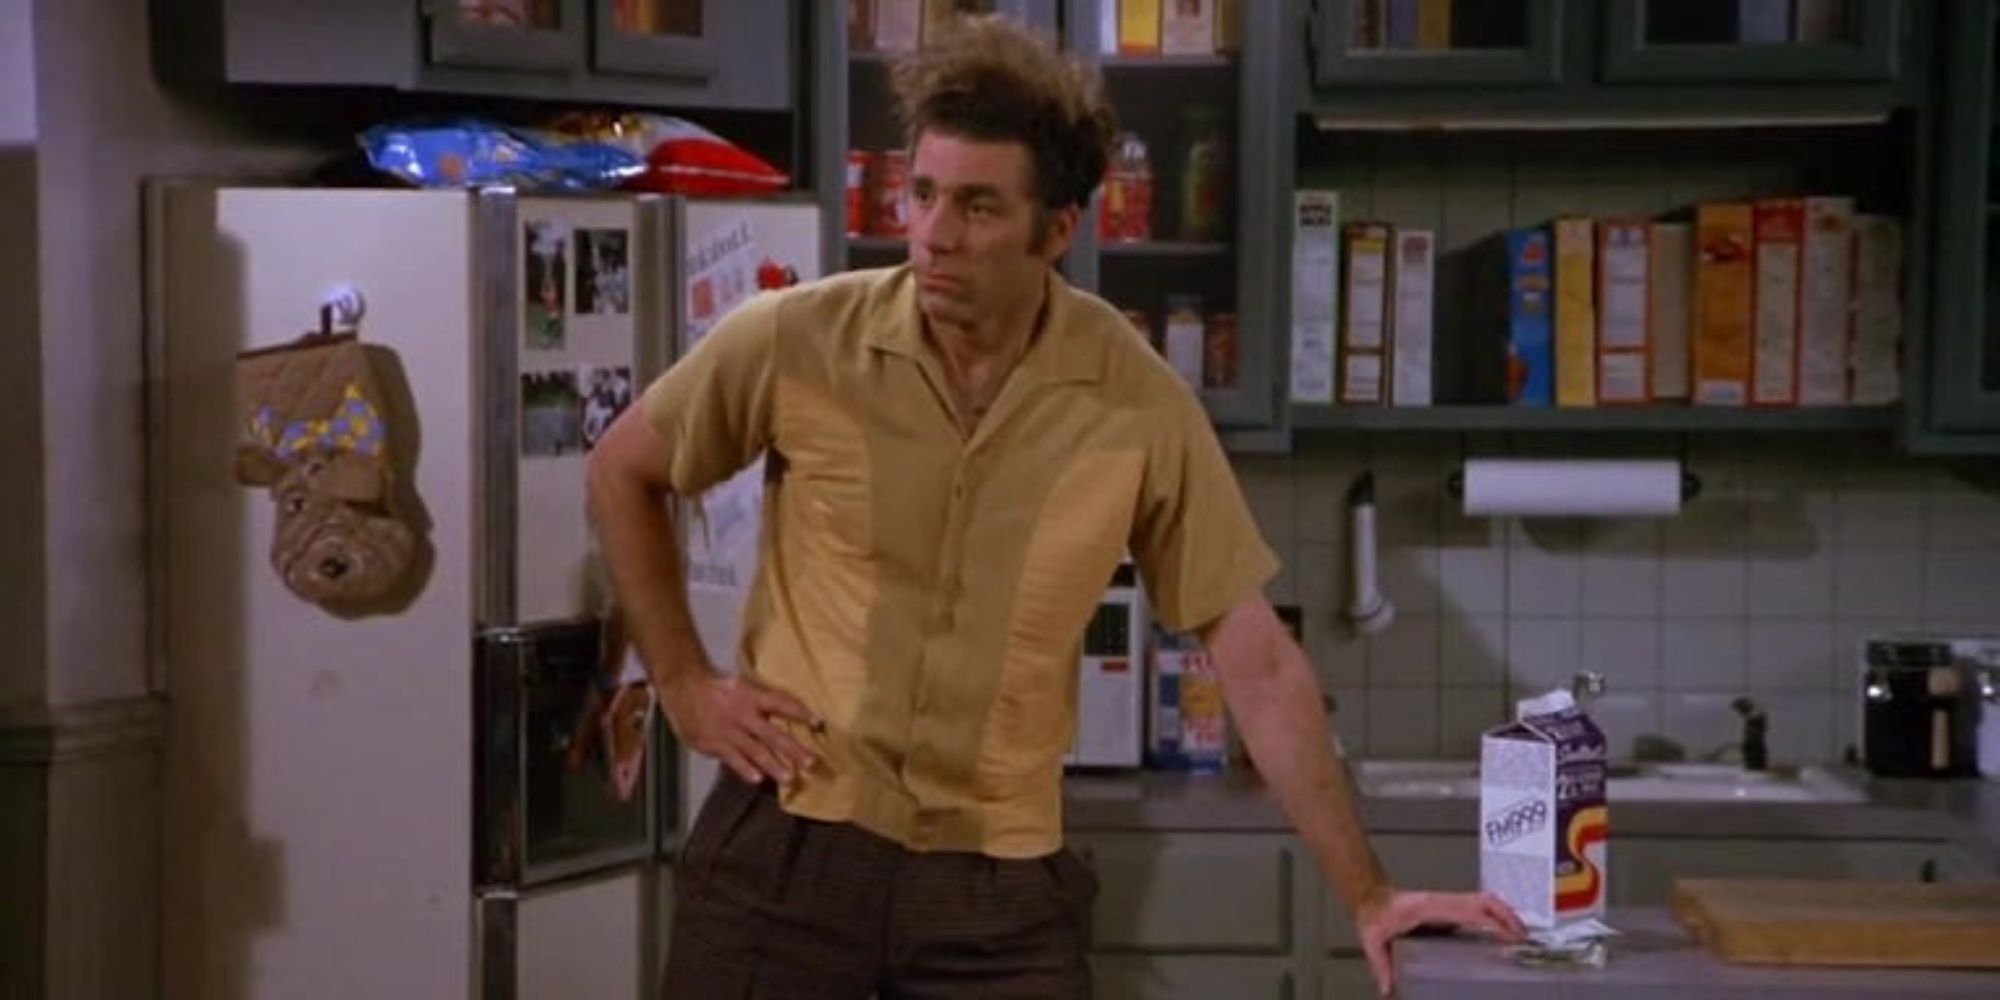 Kramer leaning his hand on the counter in Jerry's apartment in Seinfeld